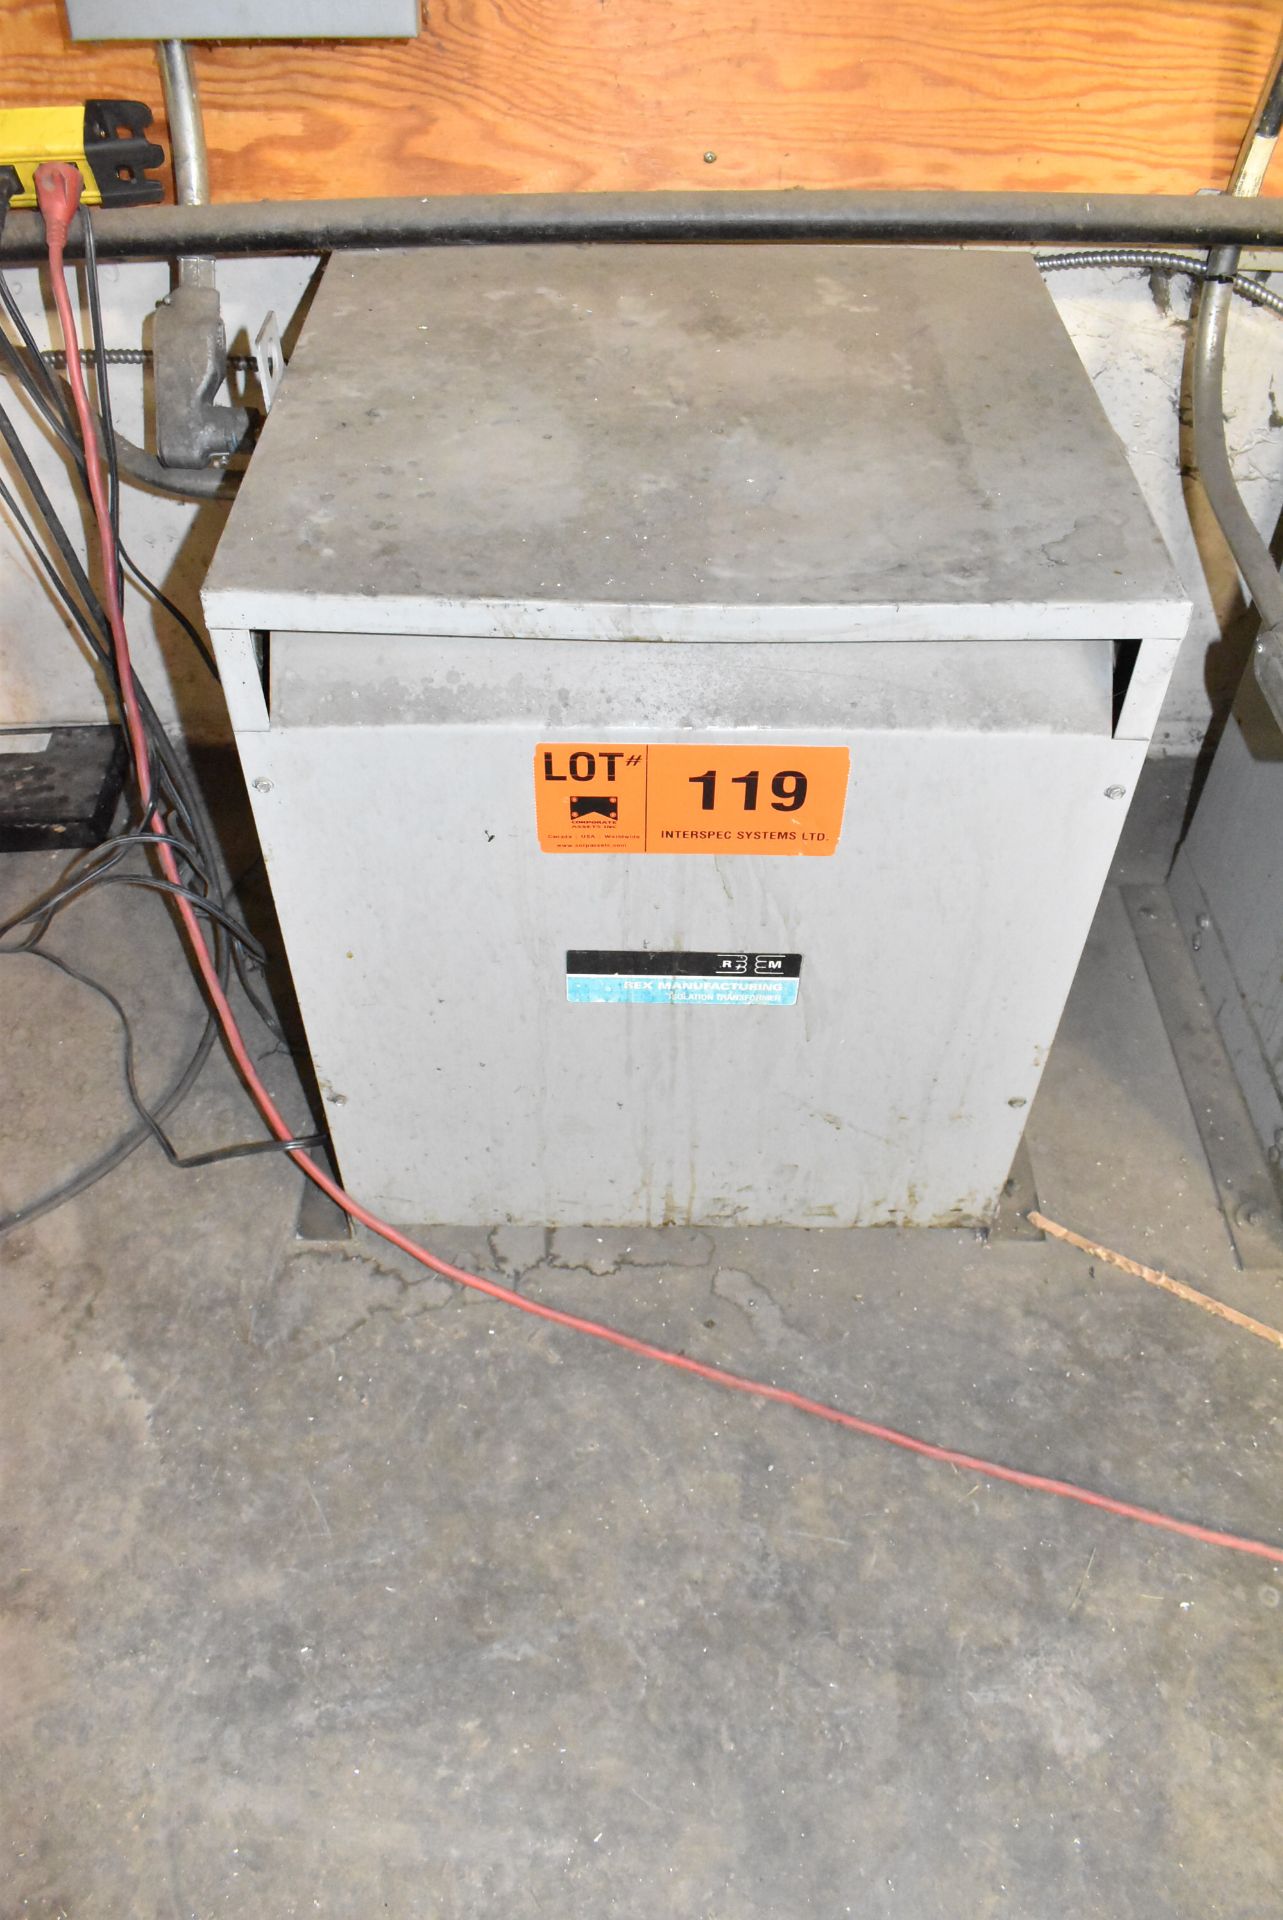 REX MANUFACTURING 30 KVA TRANSFORMER (CI) [RIGGING FOR FOR LOT #119 - $50 CAD PLUS APPLICABLE